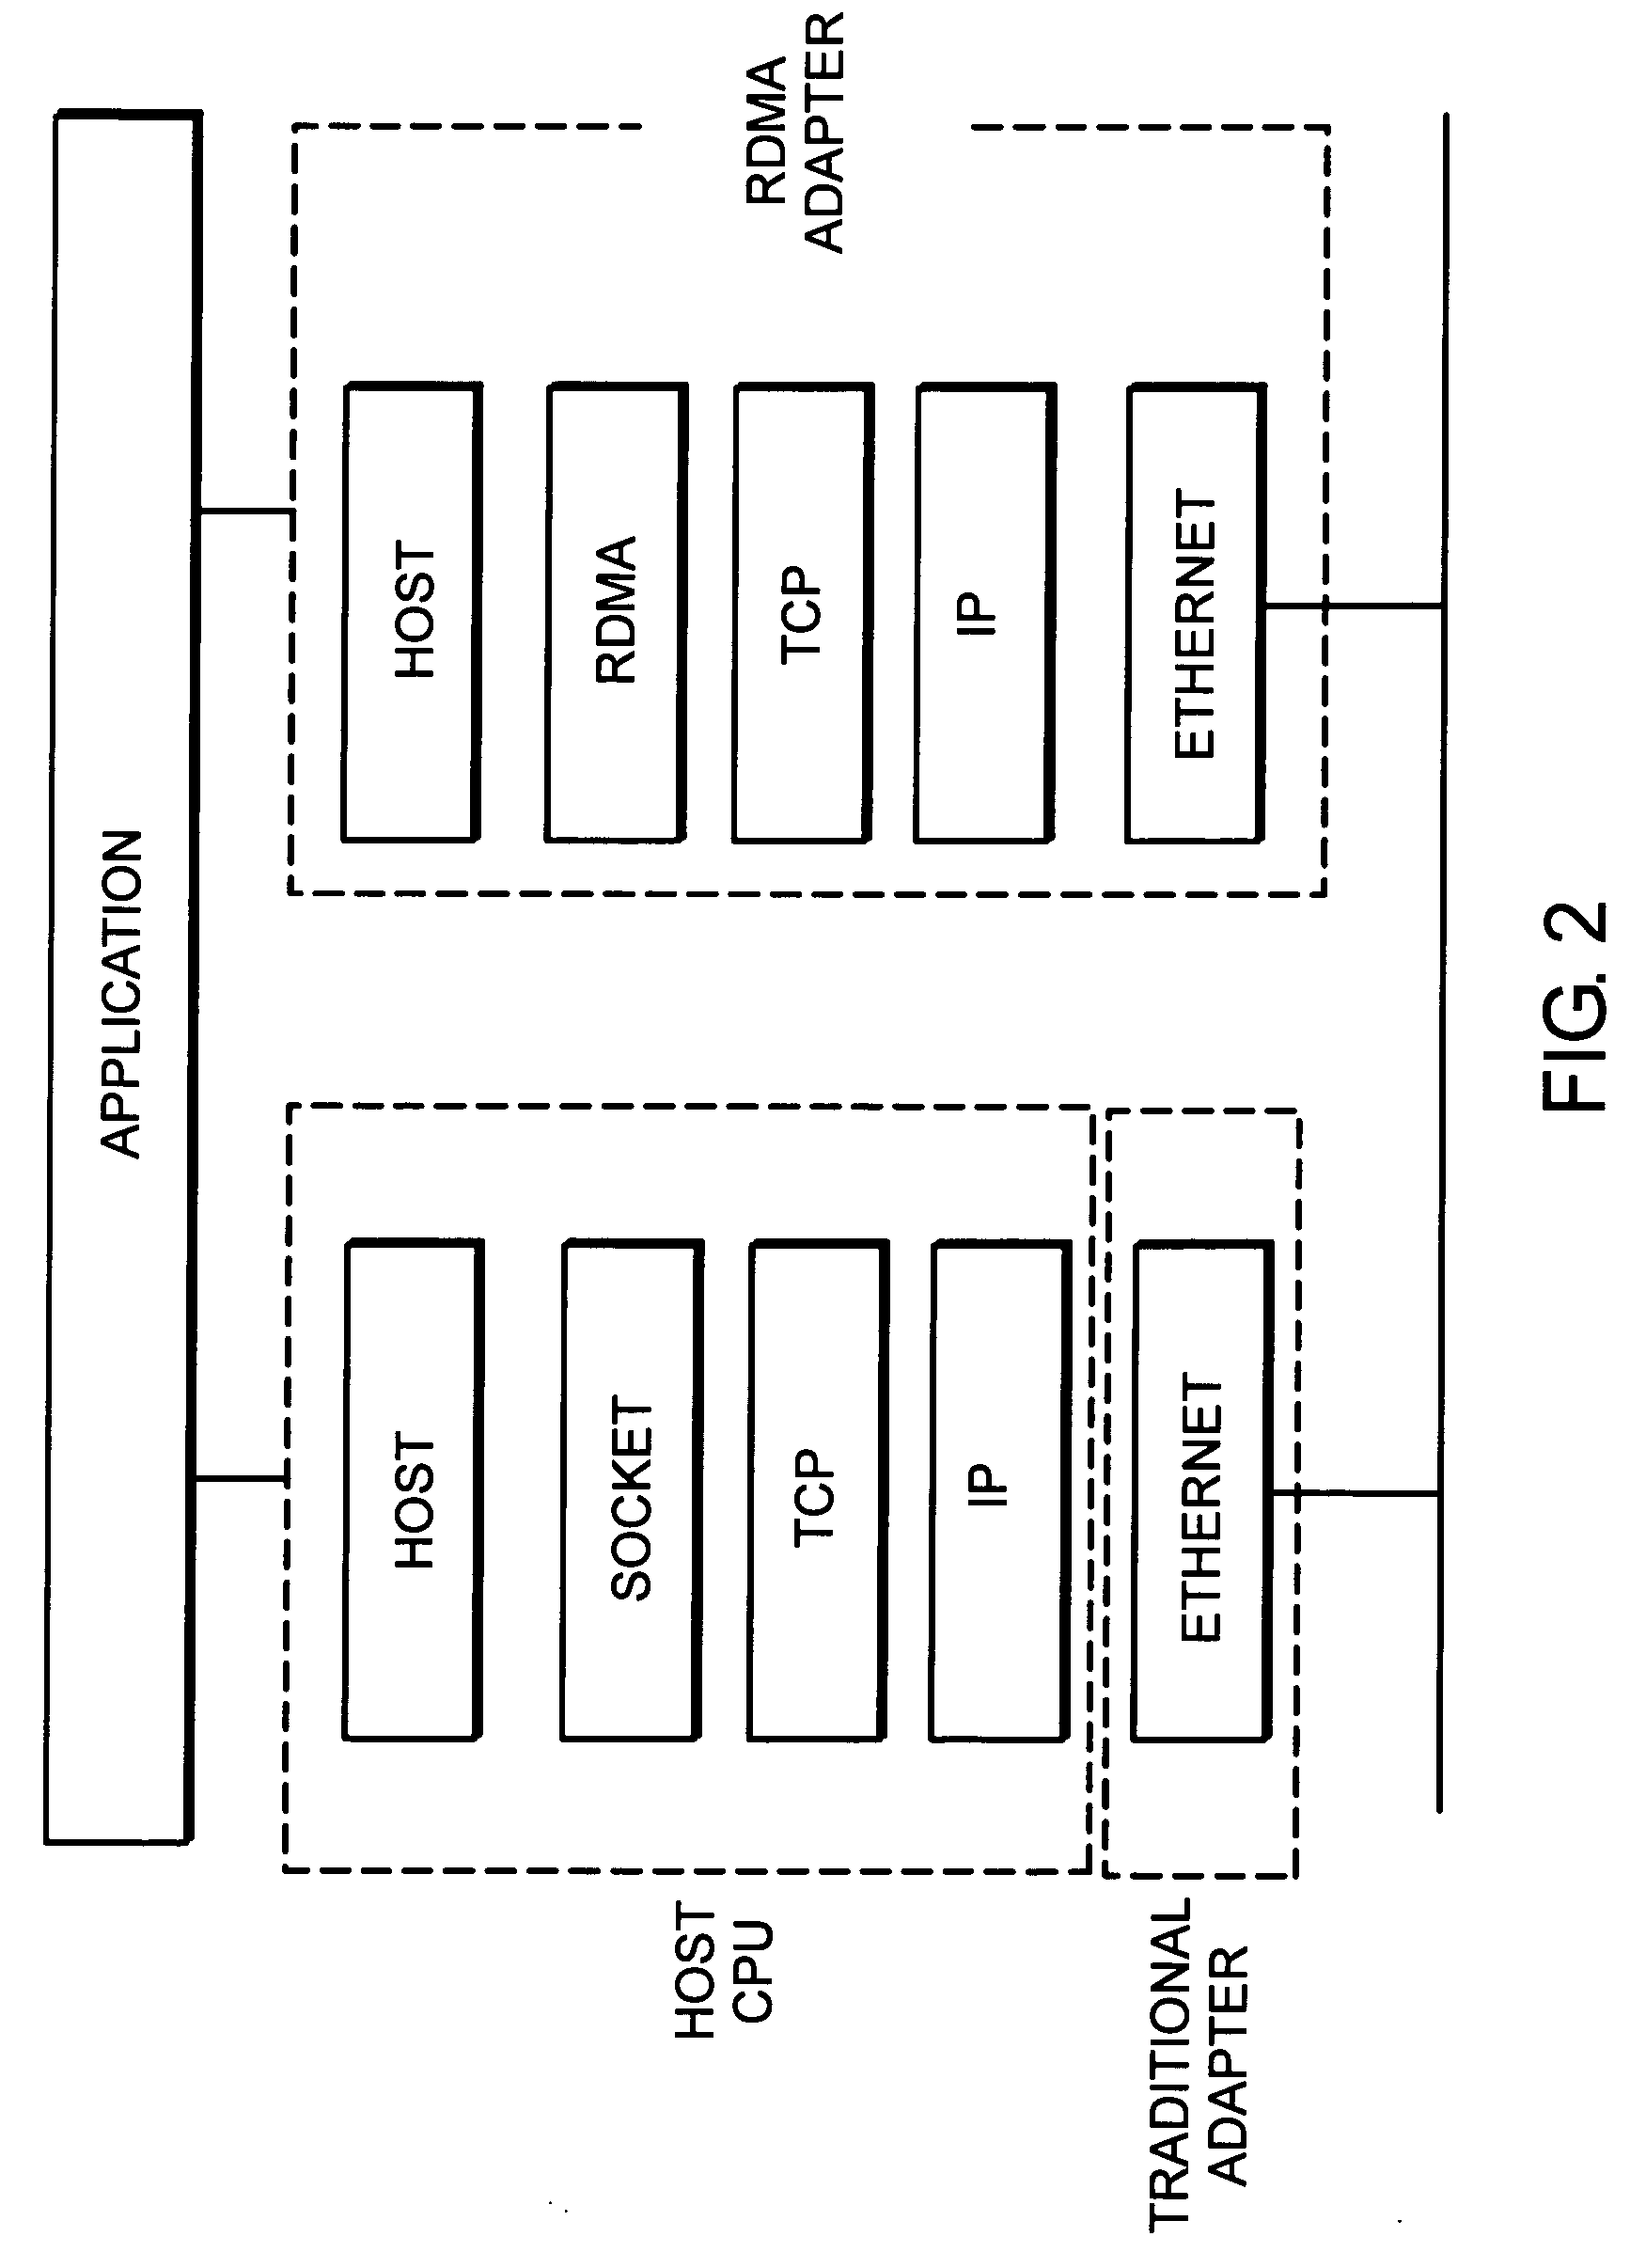 System and method for placement of RDMA payload into application memory of a processor system